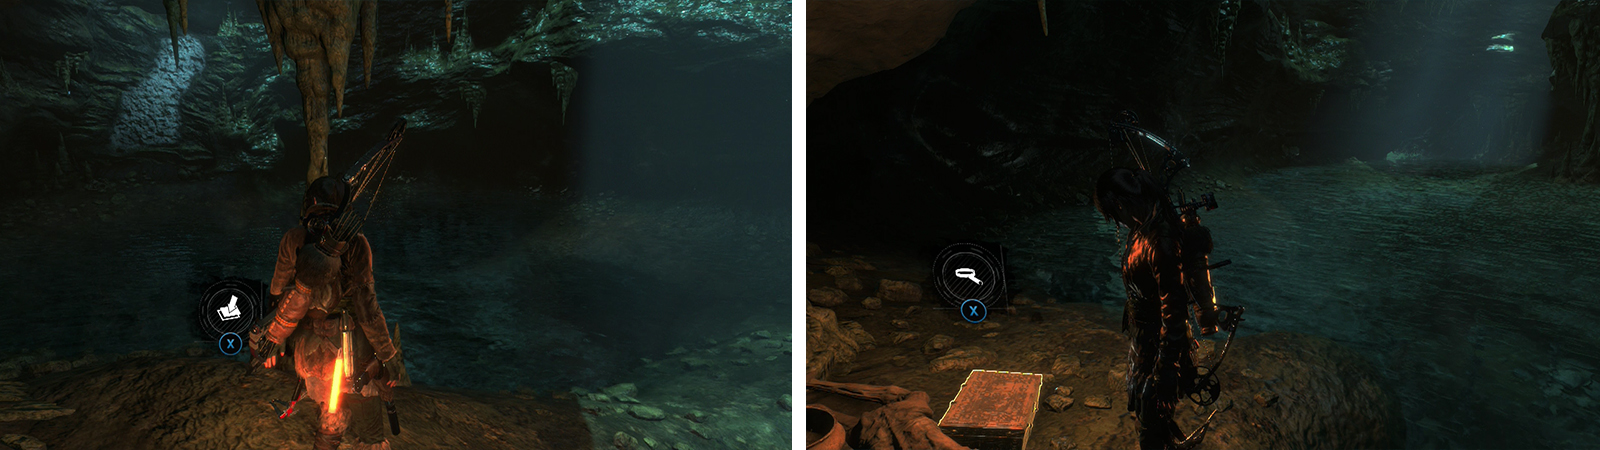 After jumping down into the pool of water loot Survival Cache 03 (left) and Relic 03 (right) before continuing.